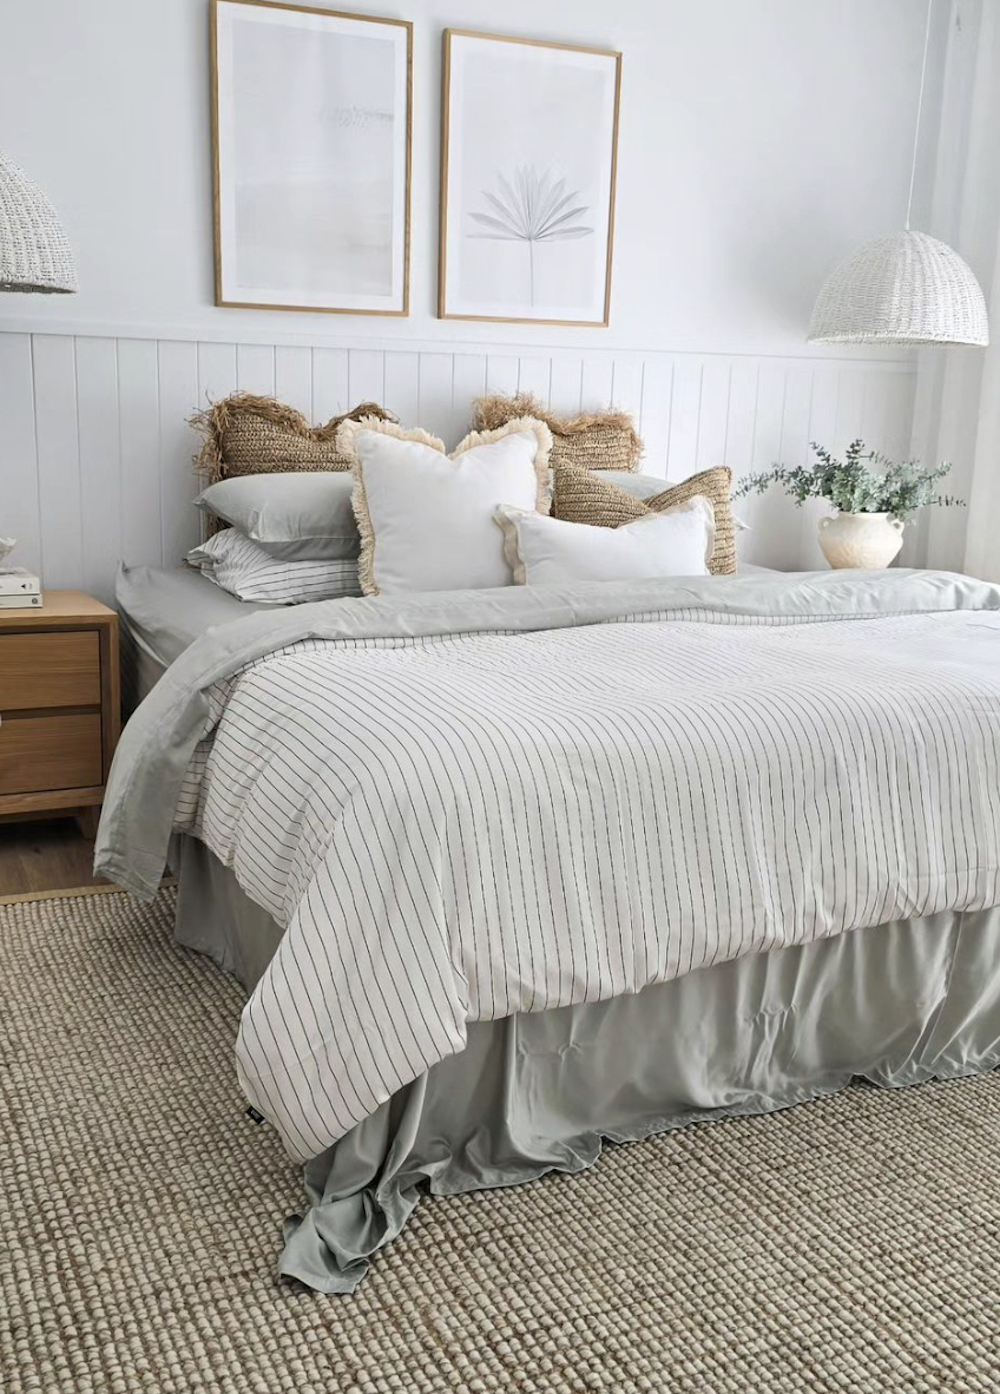 a coastal-inspired boho bedroom with raffia accents, ivory and sage tones, and natural wood details